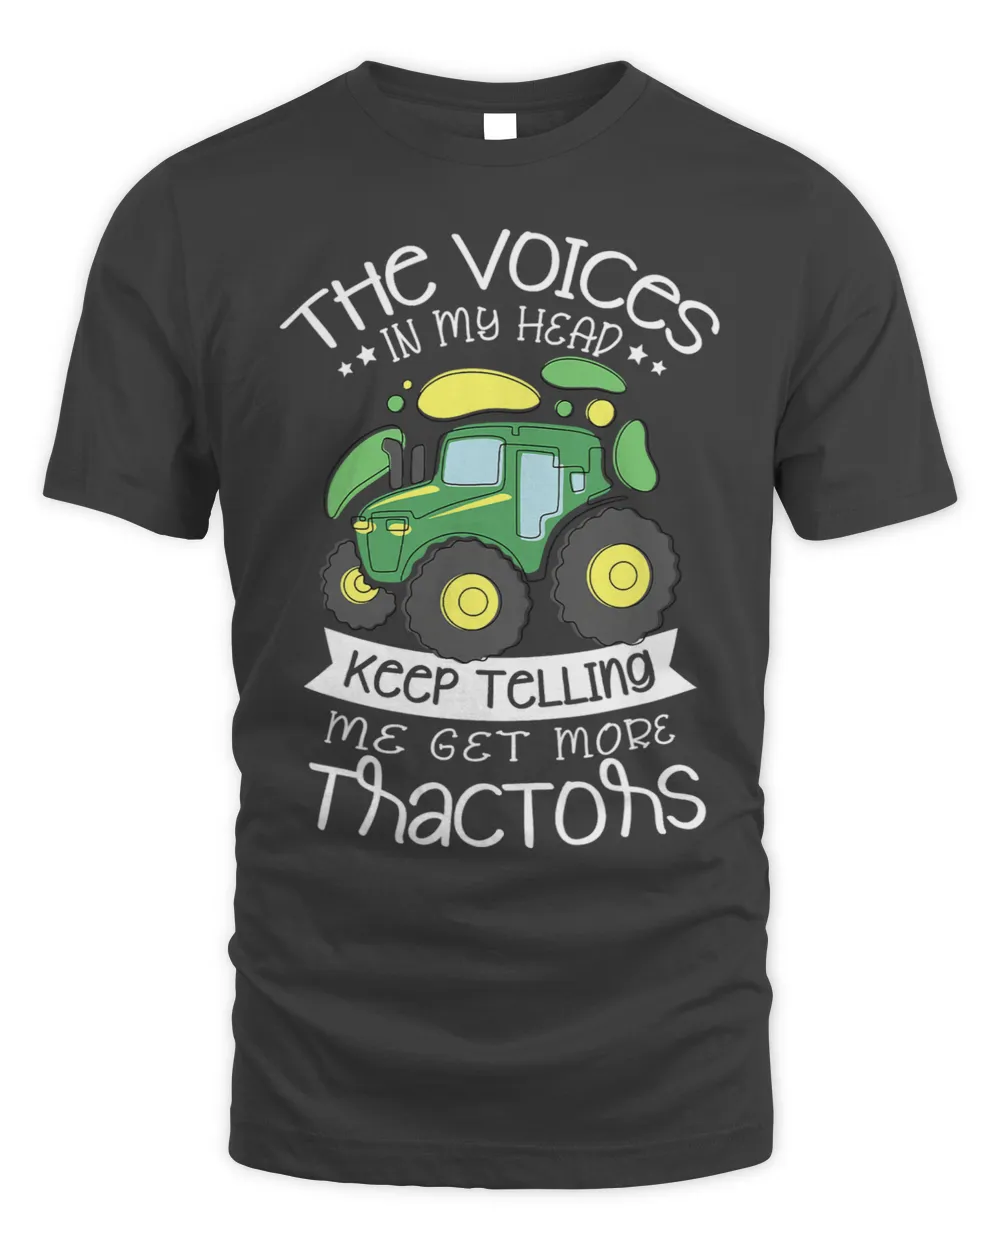 The Voices In My Head Keep Telling Me Get More Tractors